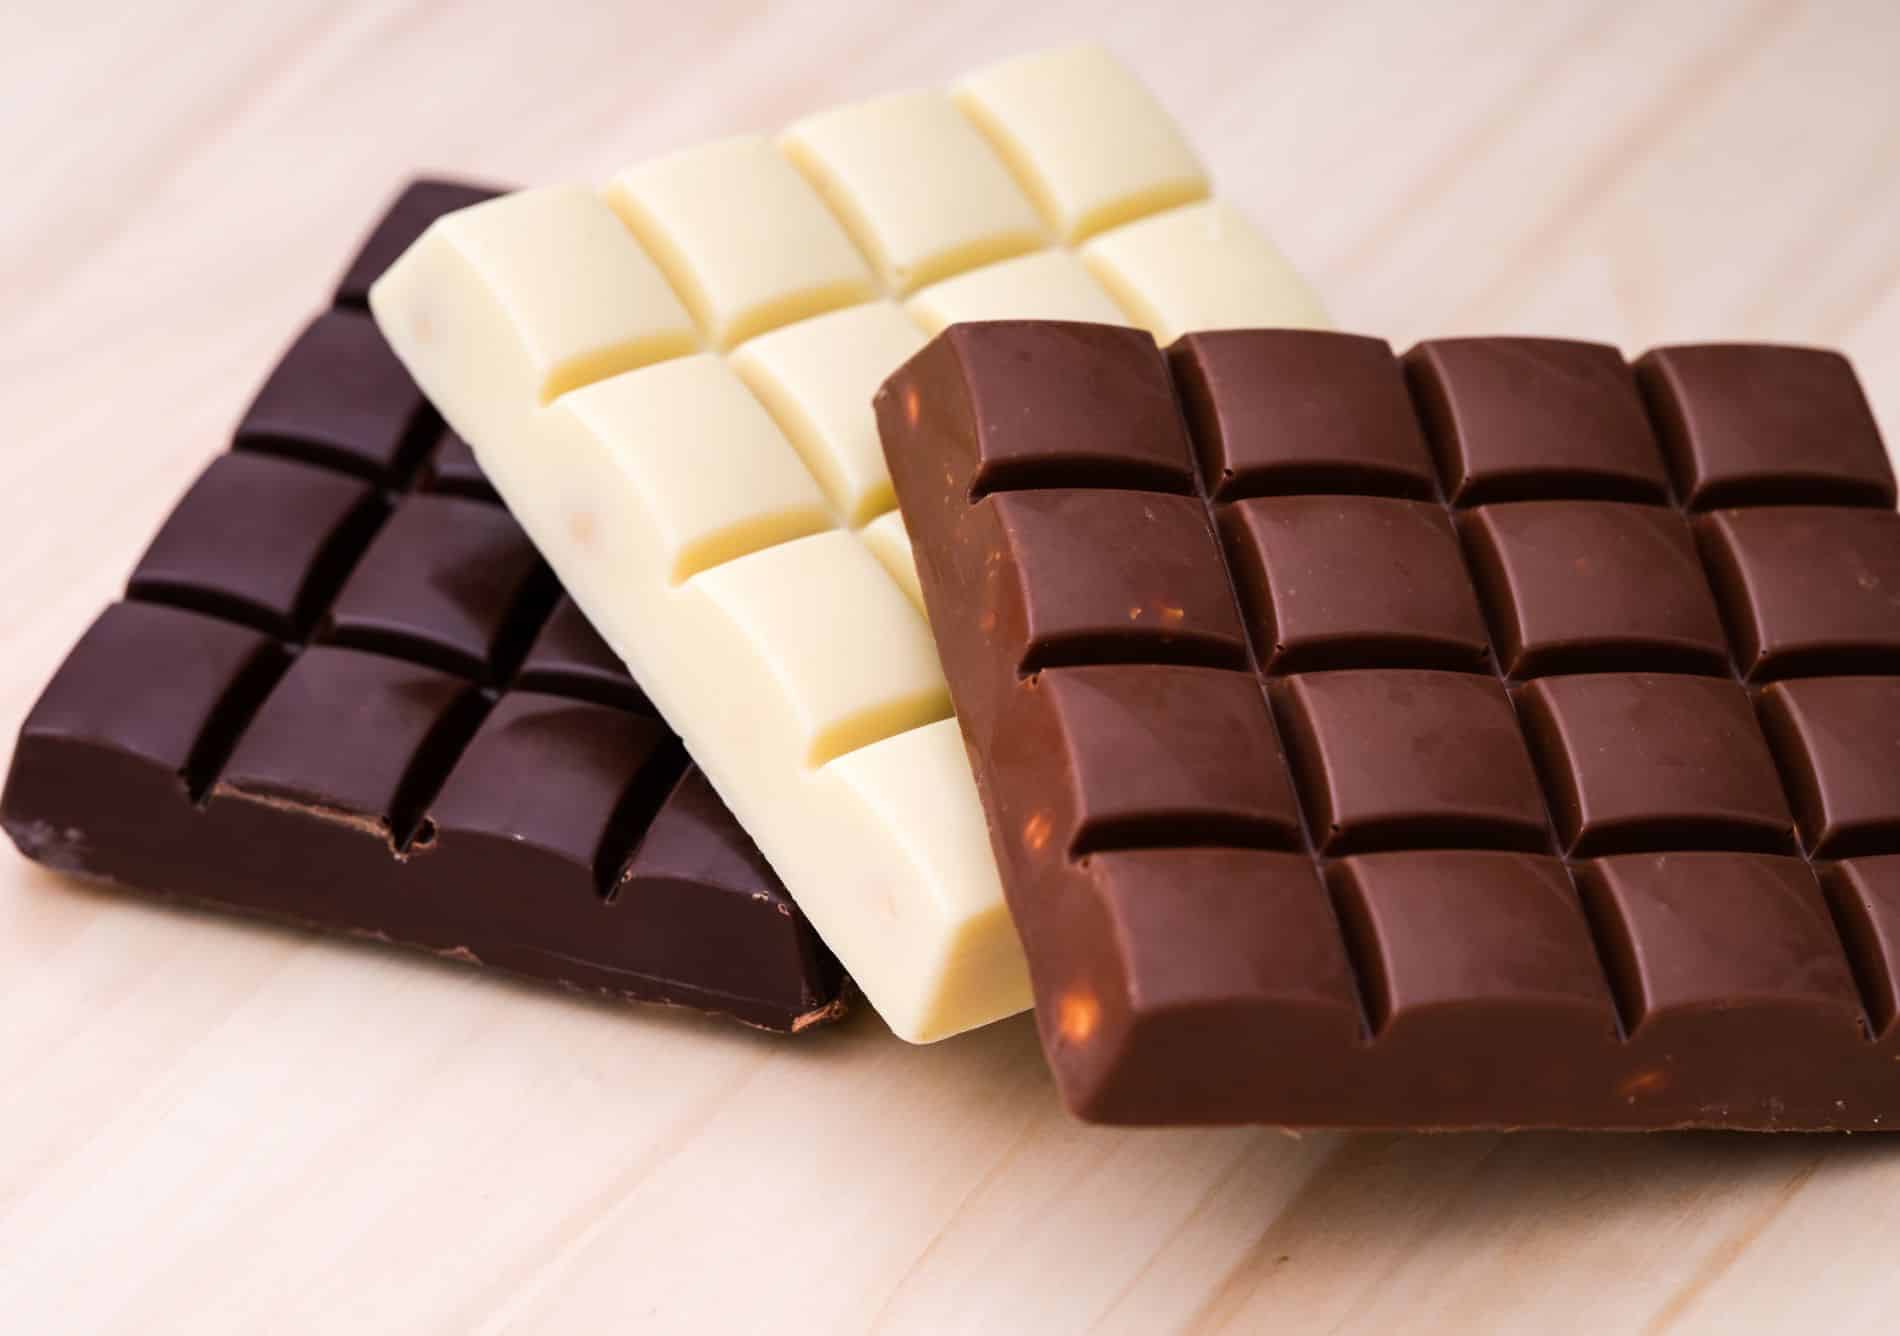 bars of dark, white, and milk chocolate on a table